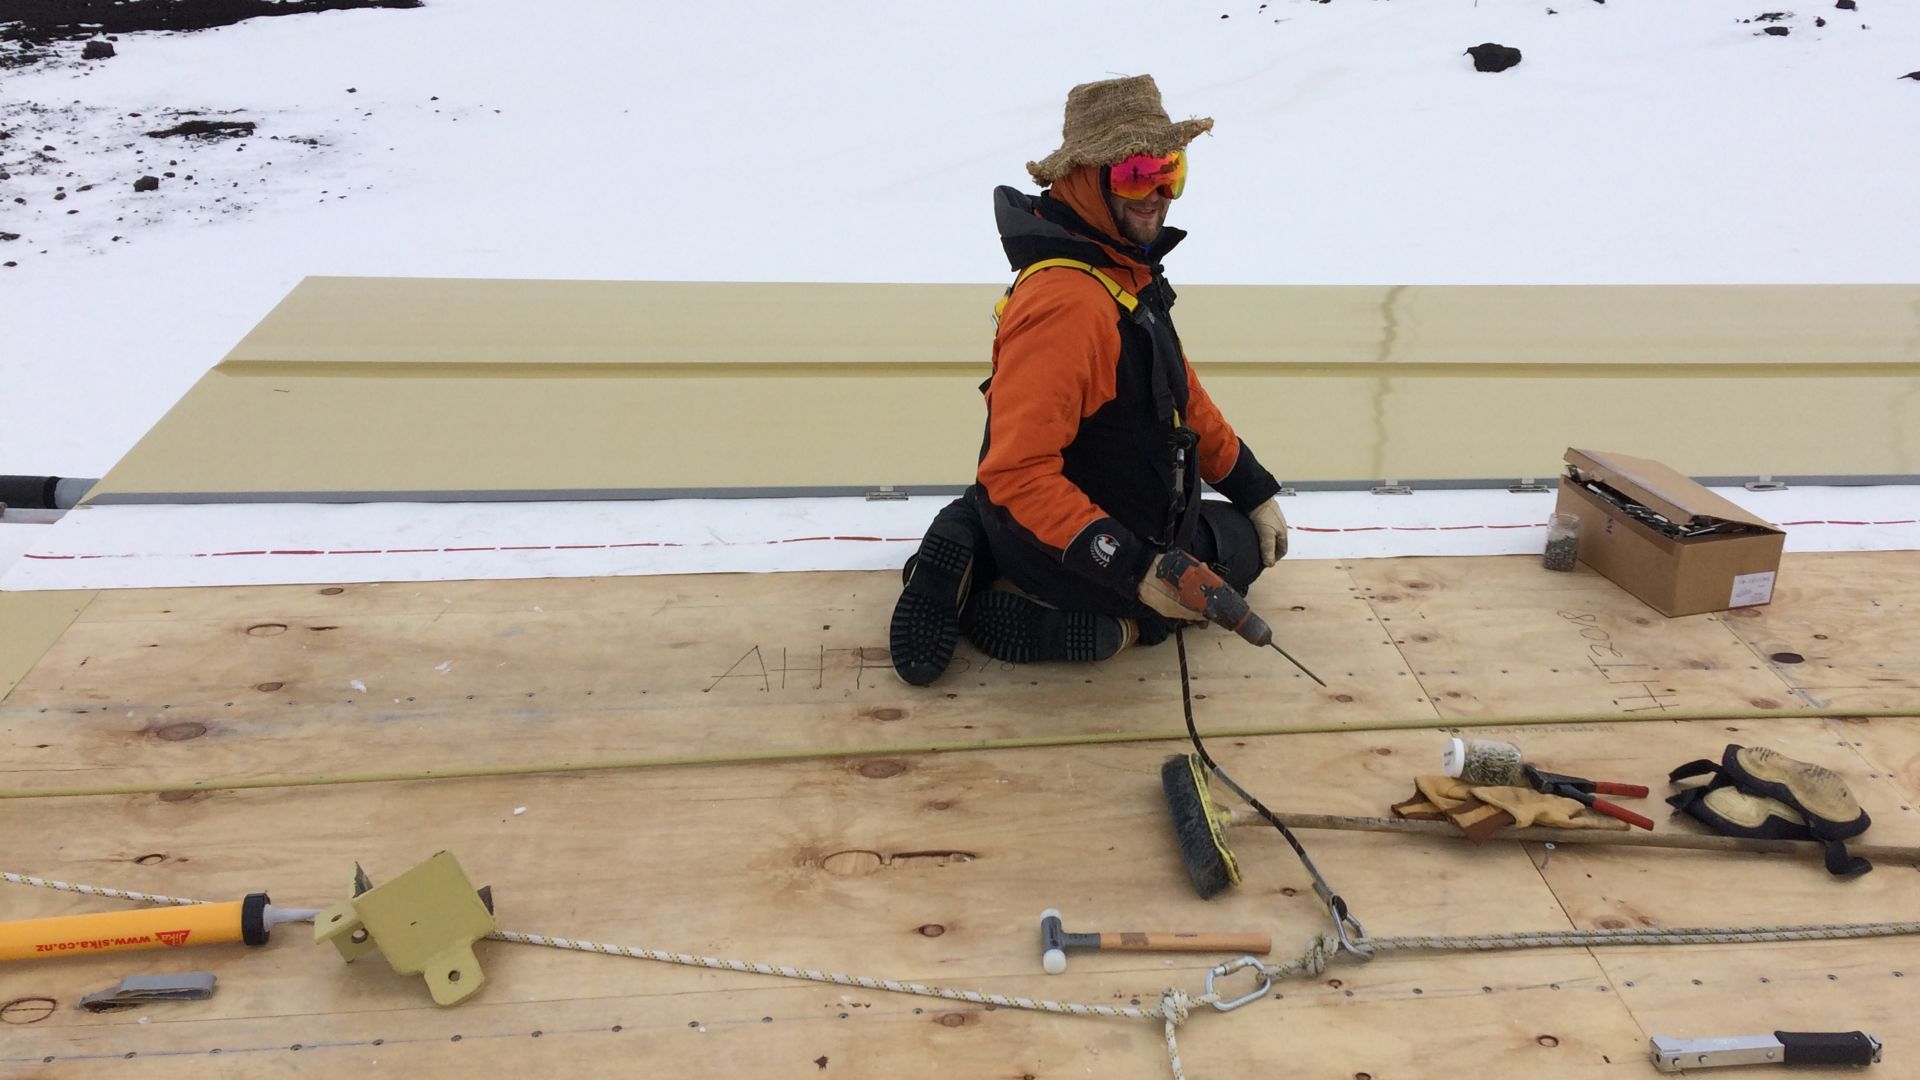 Antarctic Heritage Trust and High performance sealant to stop roof from leaking. Joint sealing.